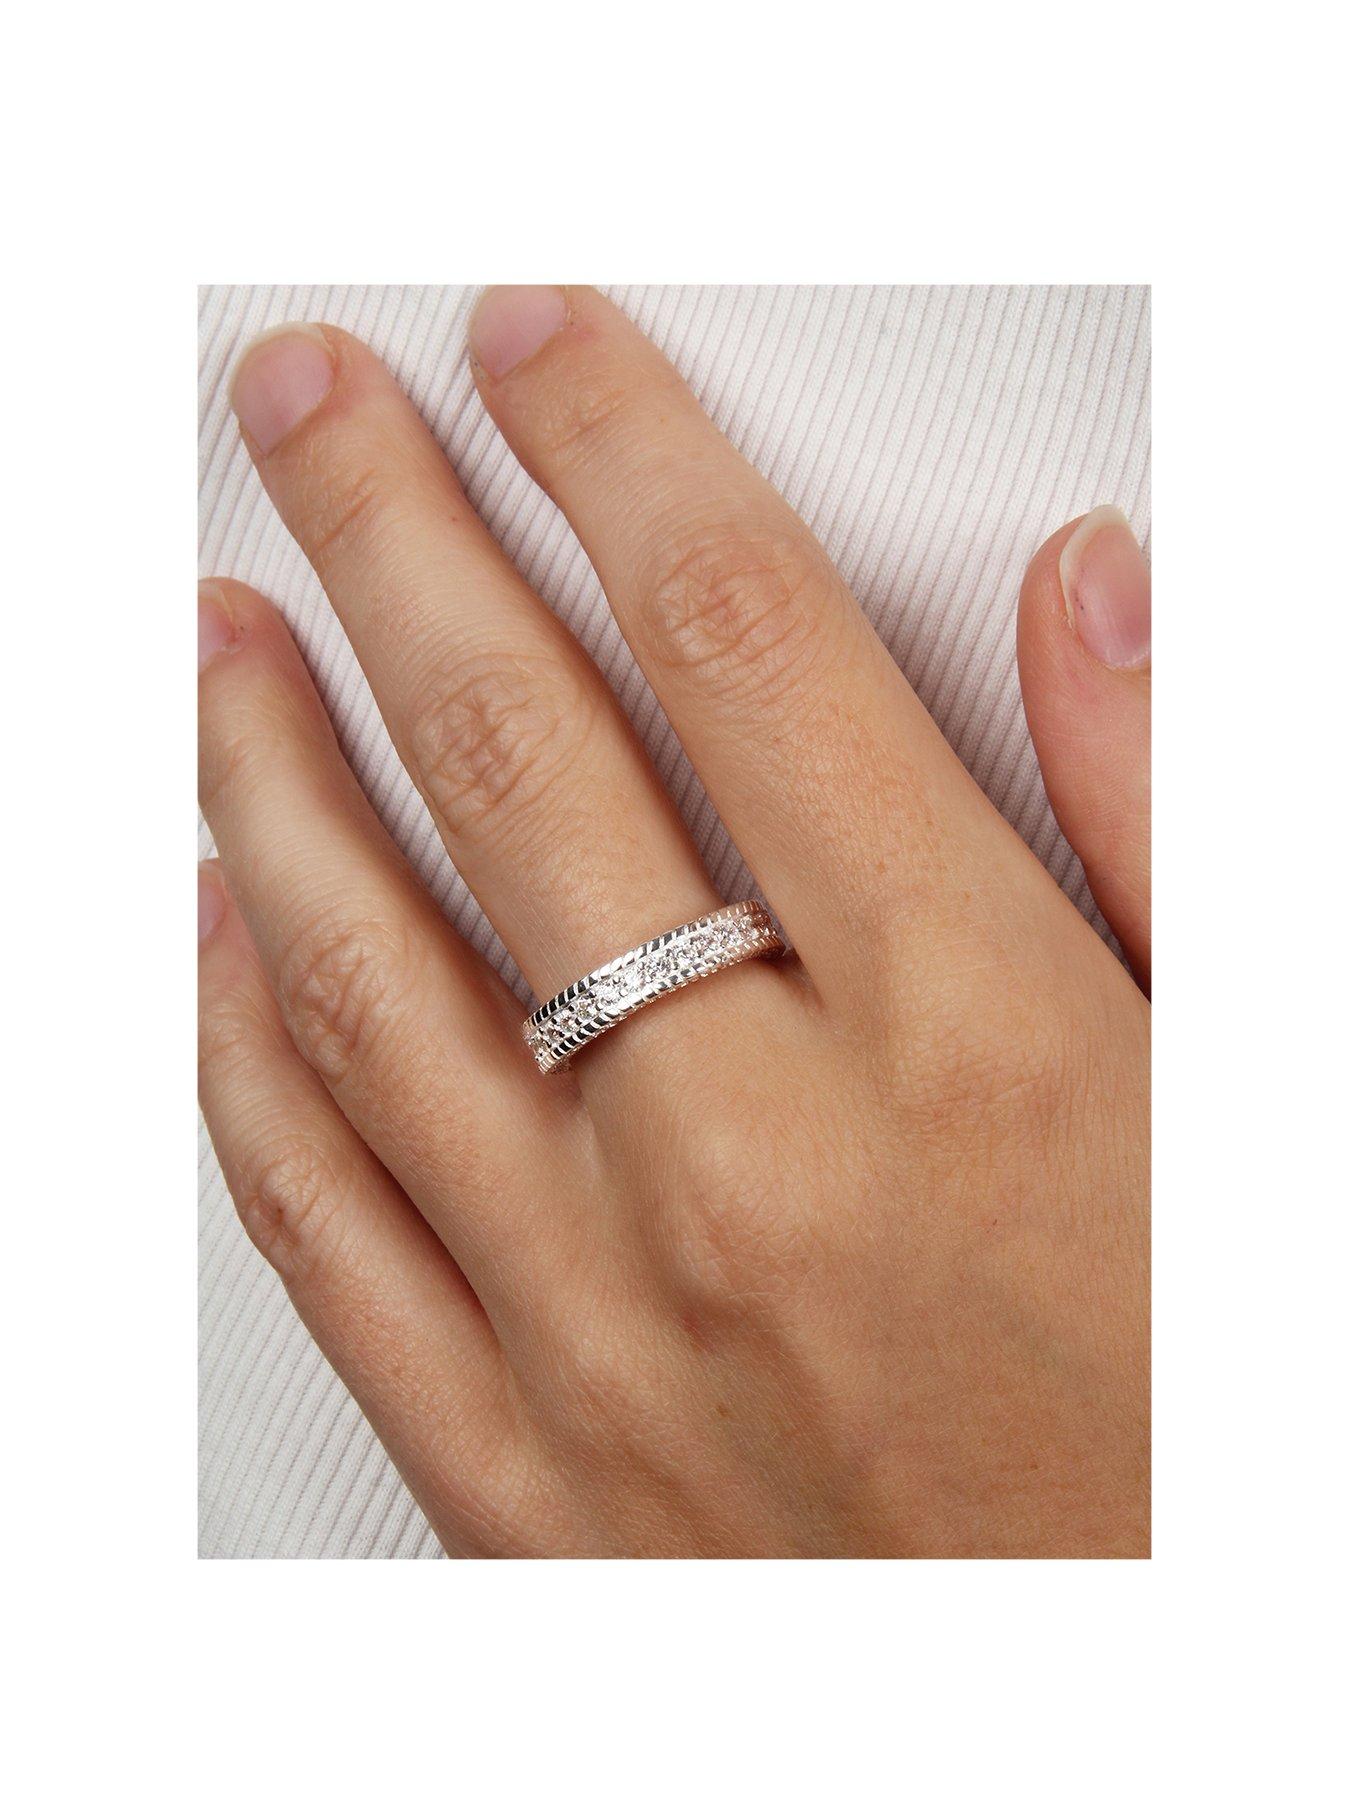  Sterling Silver & Cubic Zirconia Eternity Ring